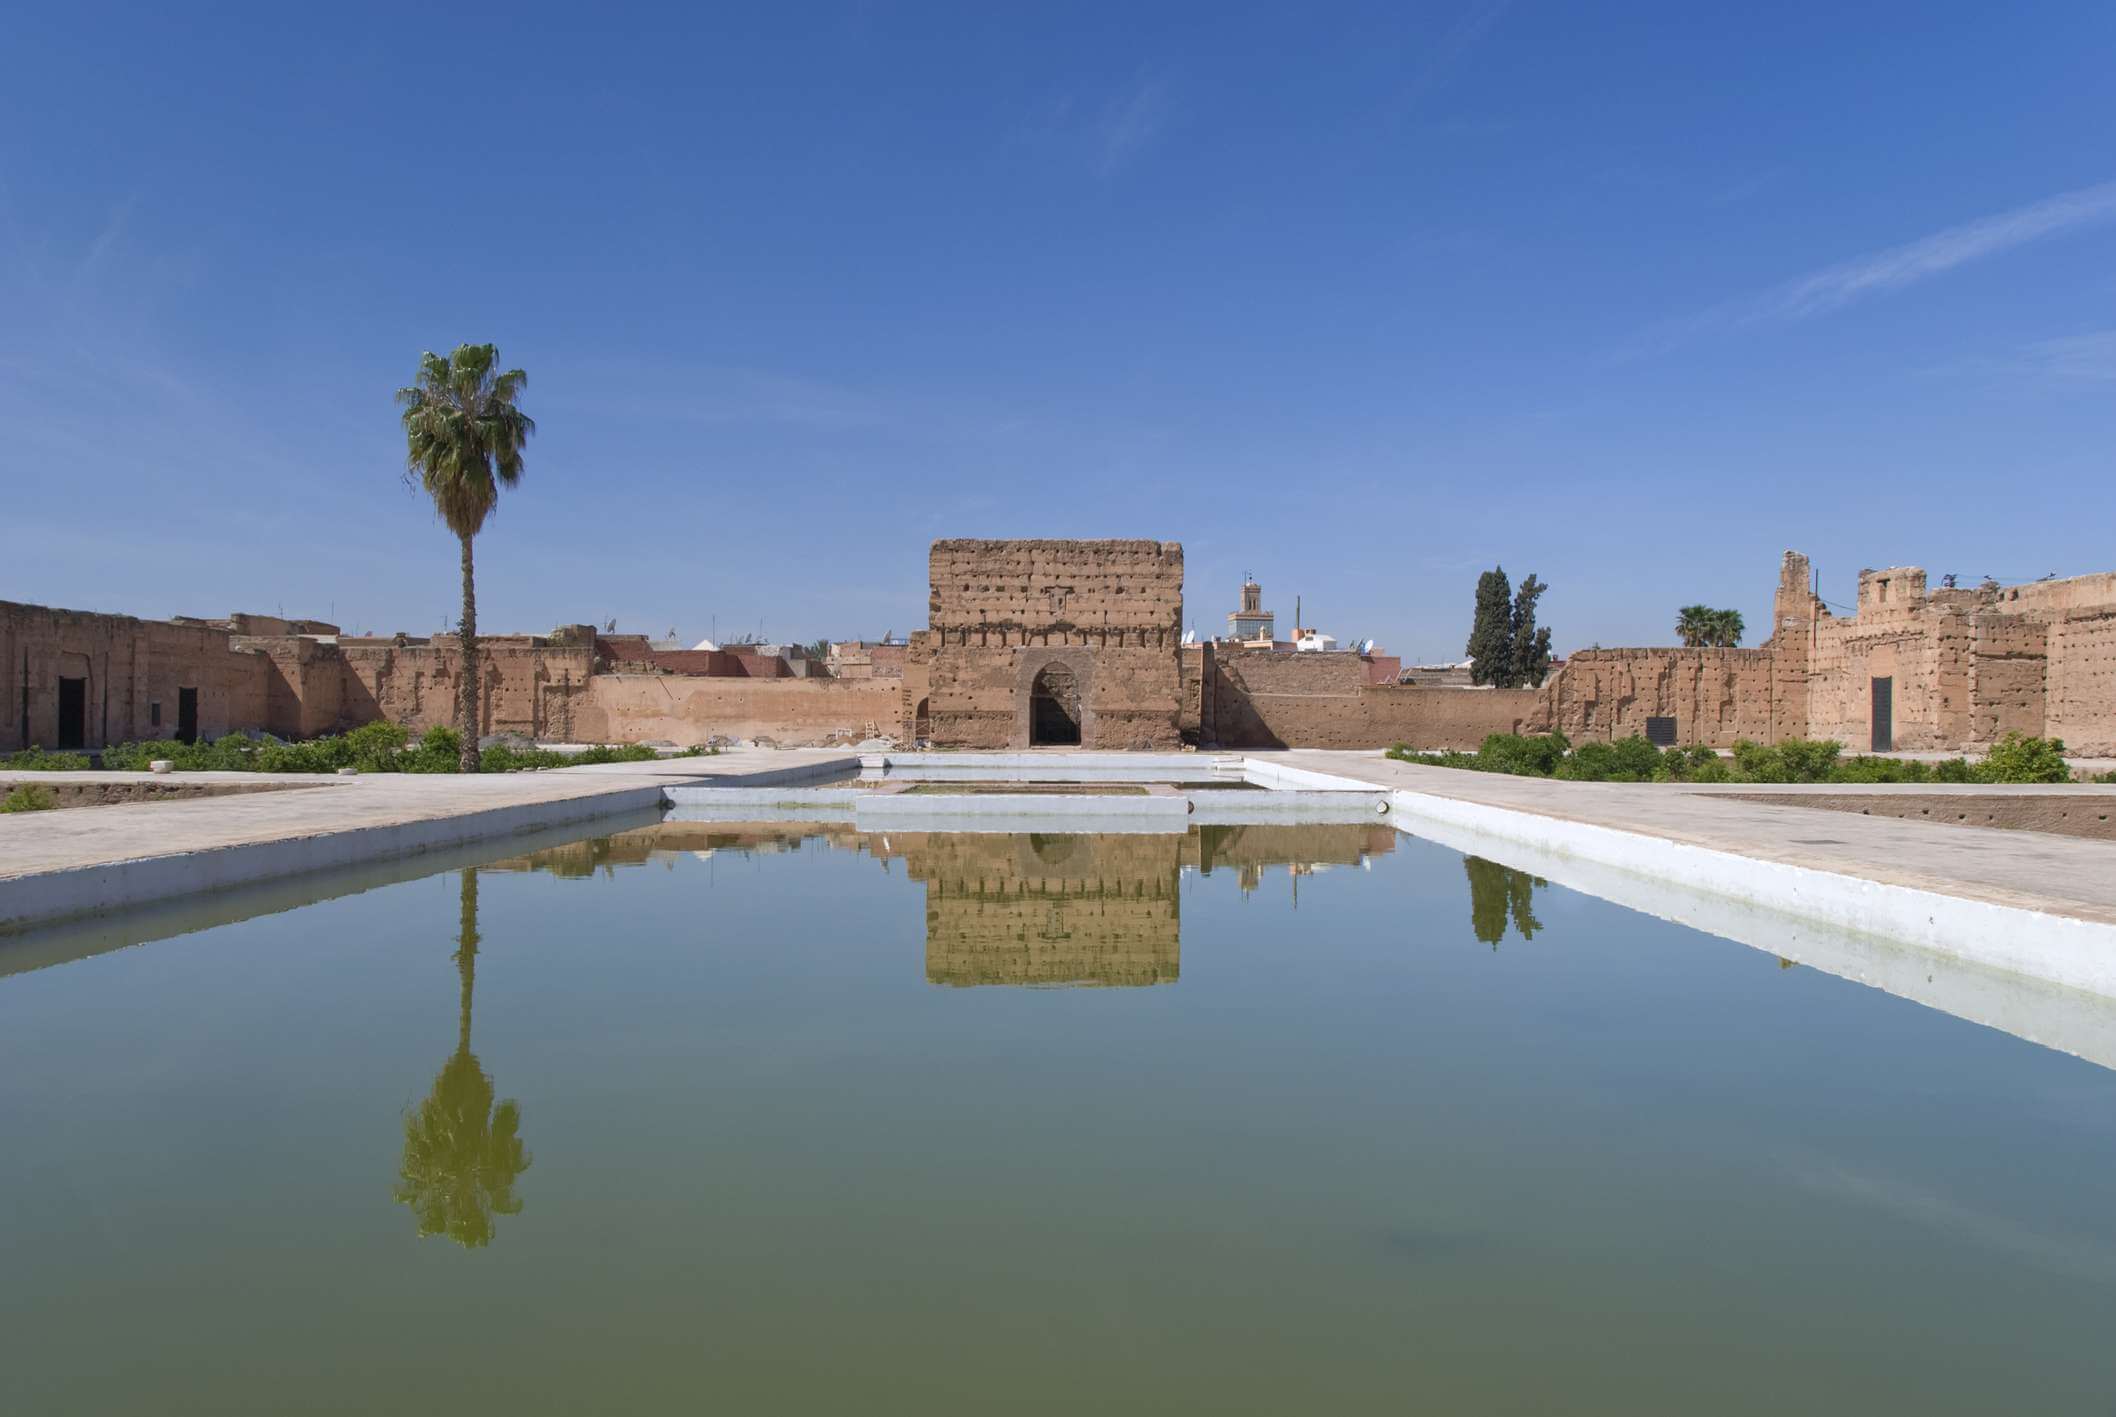 Immerse yourself in the rich history and architectural beauty of this ancient palace.